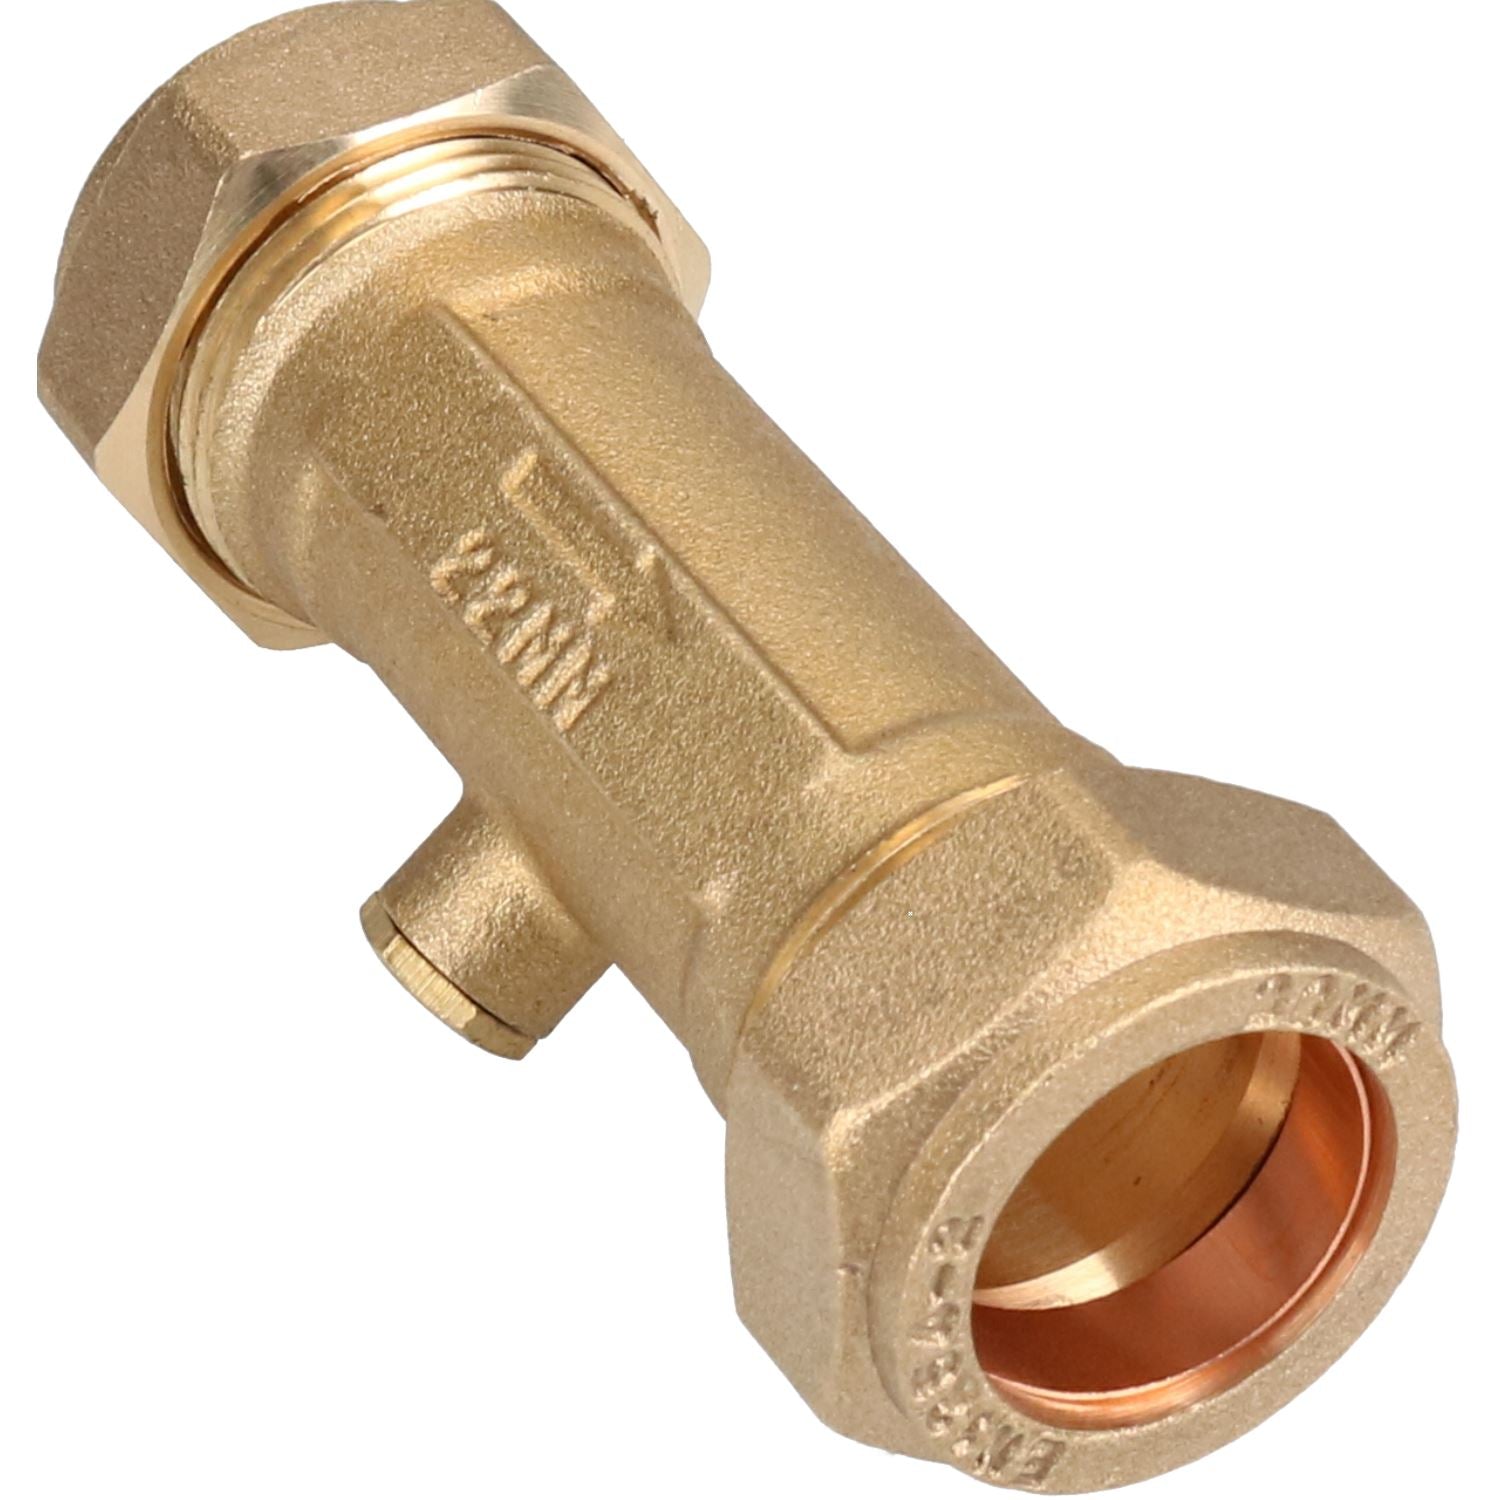 22mm Brass Double Check Valve One-Way Non-Return Compression Fittings WRAS